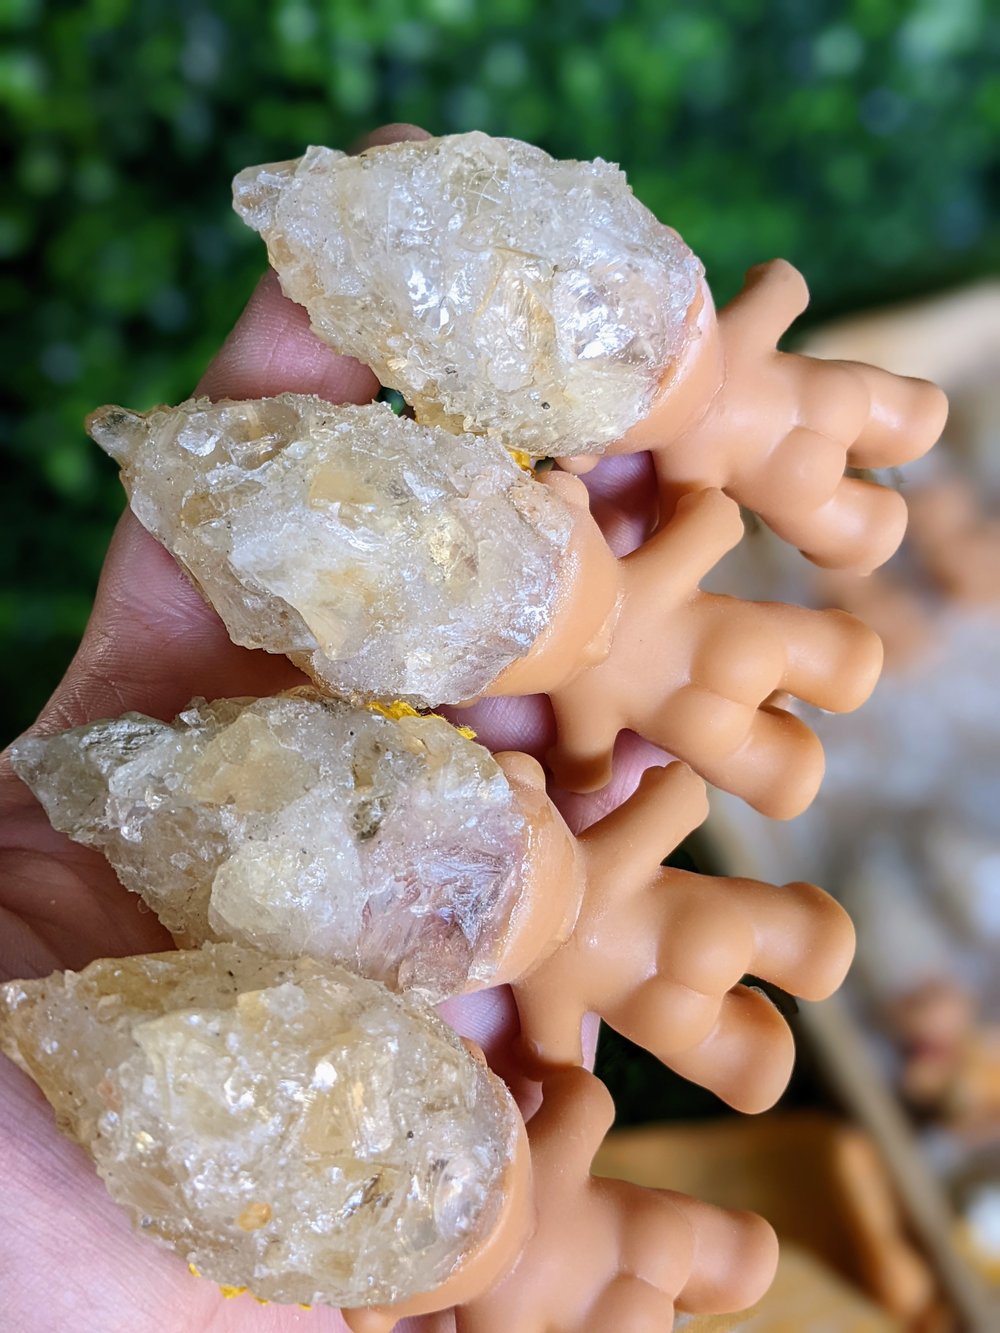 Citrine "Golden Amethyst" Crystal Troll Shorty with Sunflower Crown 3.5"